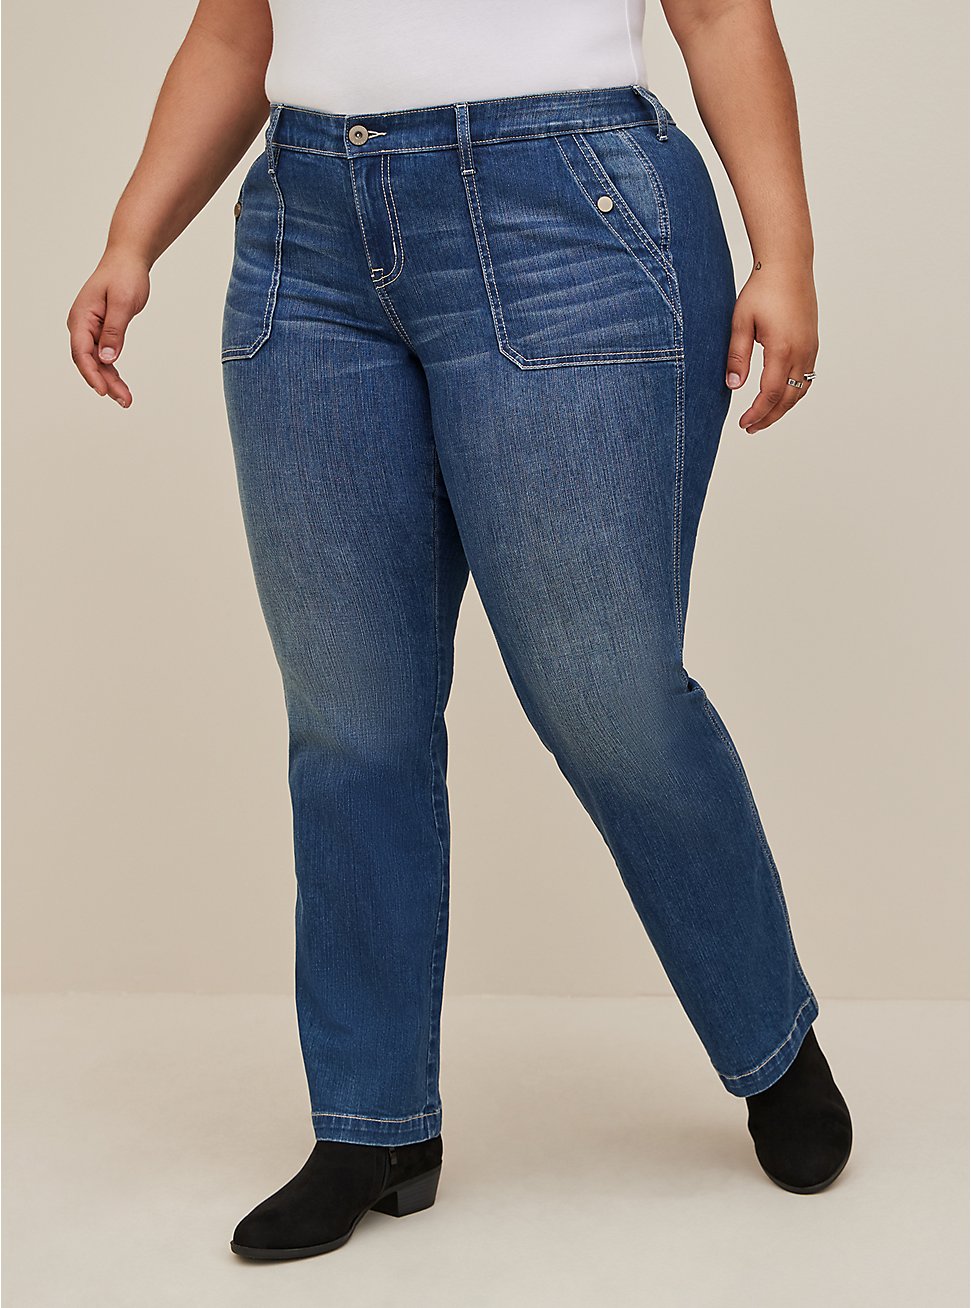 Slim Boot Vintage Stretch Mid-Rise Jean, ROLL OUT, hi-res